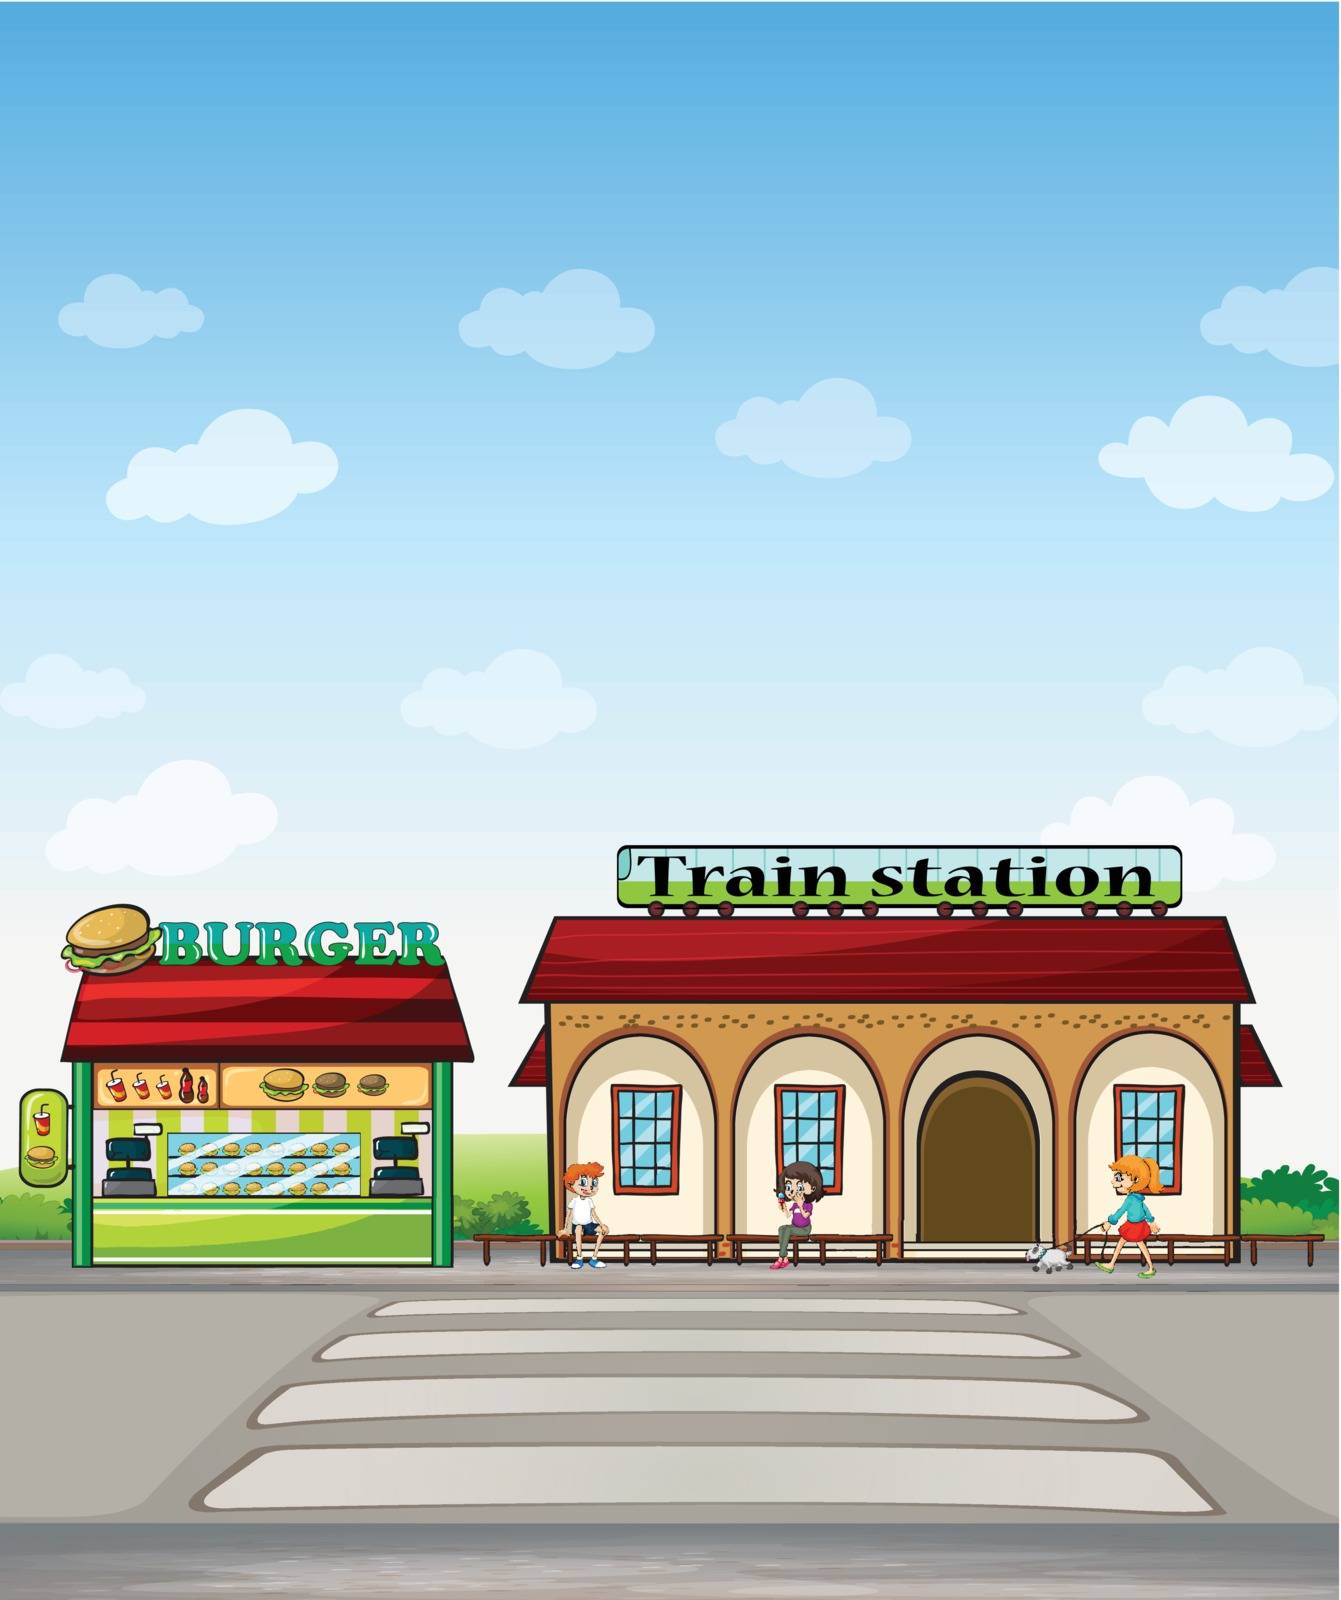 A burger junction and a train station by iimages